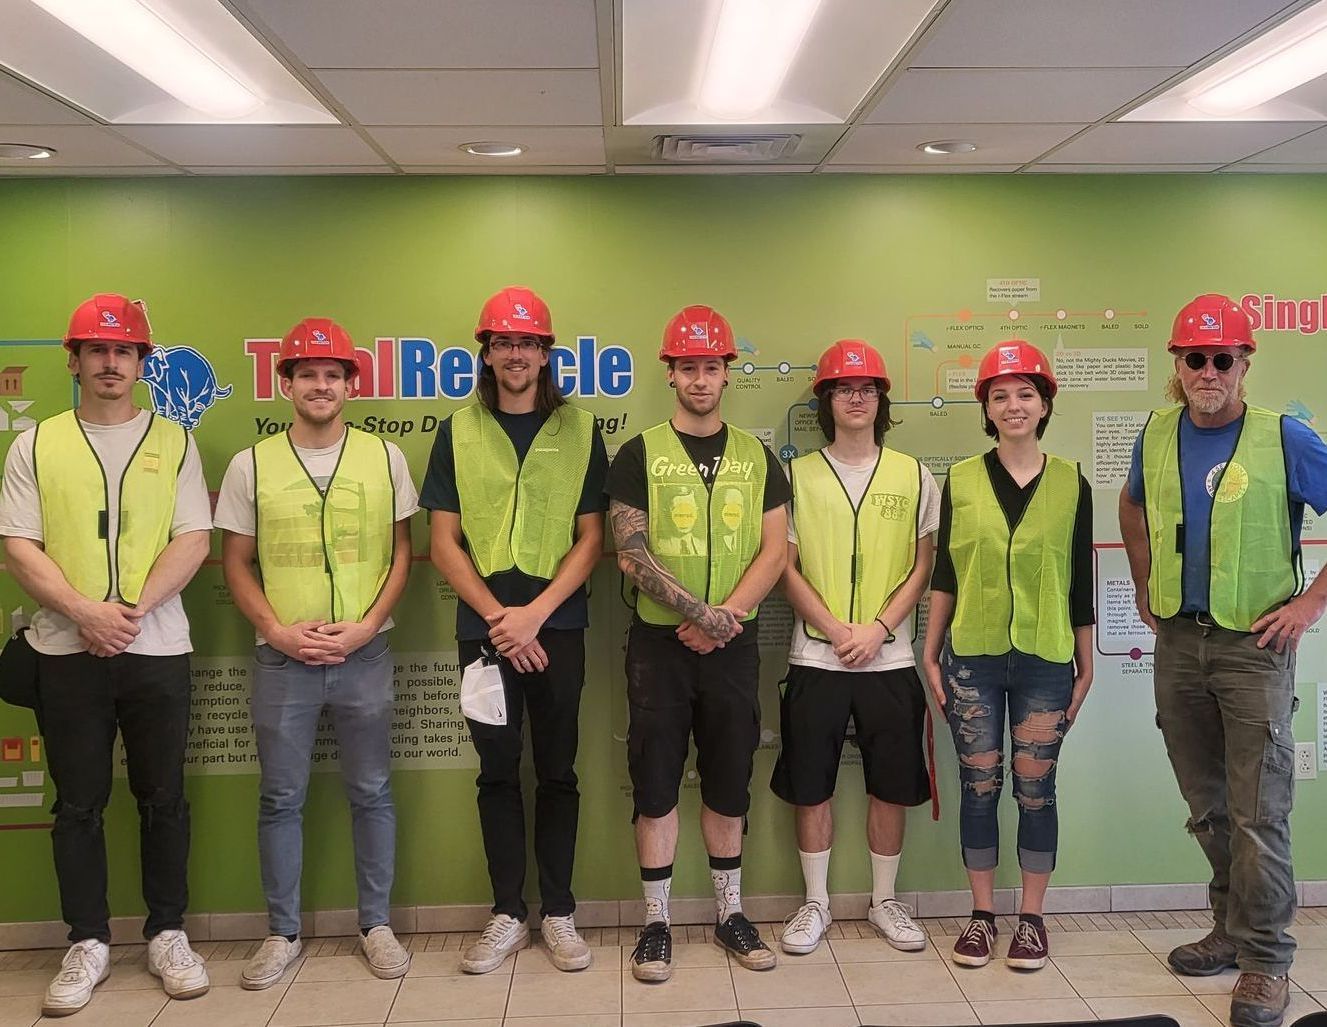 the 4 Seasons crew in hardhats and vests, standing in front of the Total Recycle recycling diagram